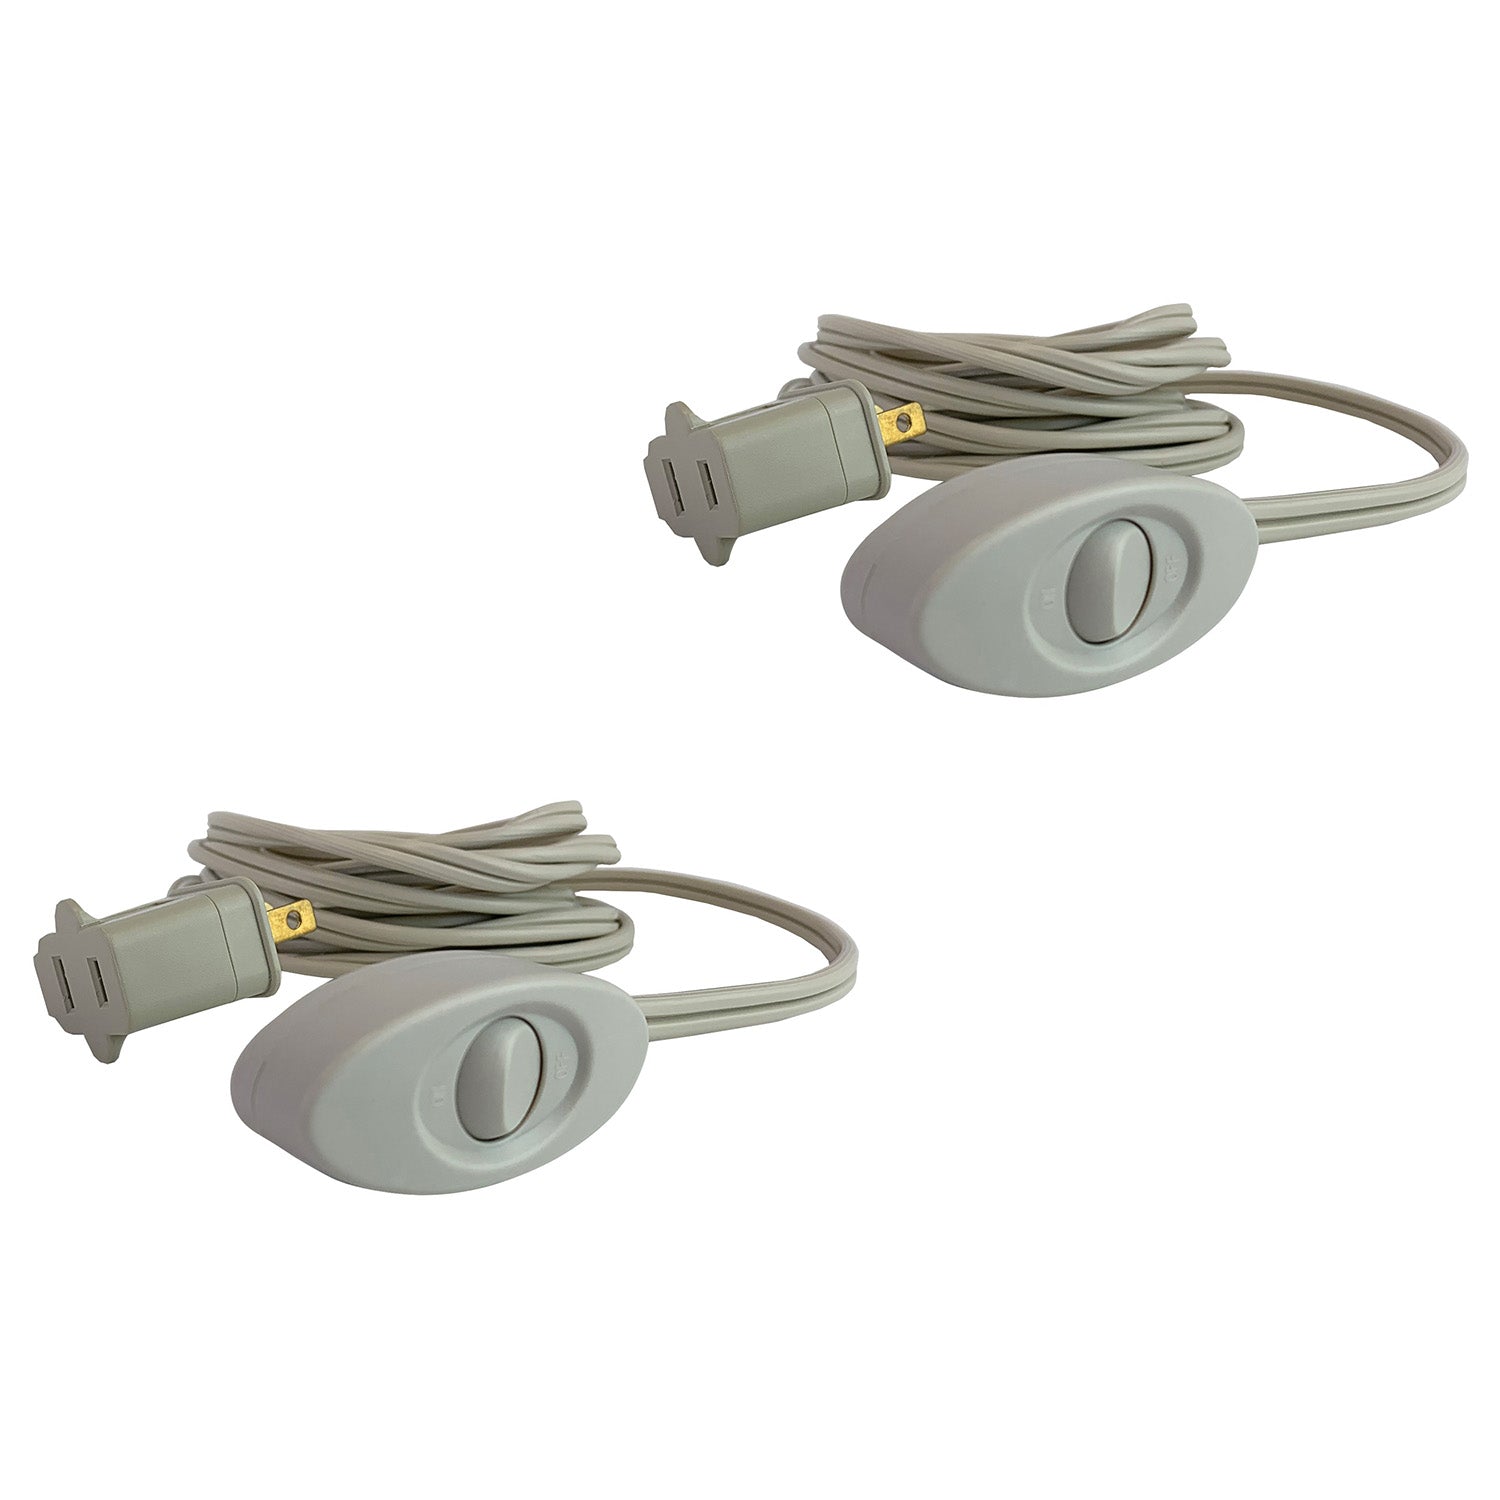 STANLEY 31324 CordMax Switch Polarized Extension Cord, 2 Pack